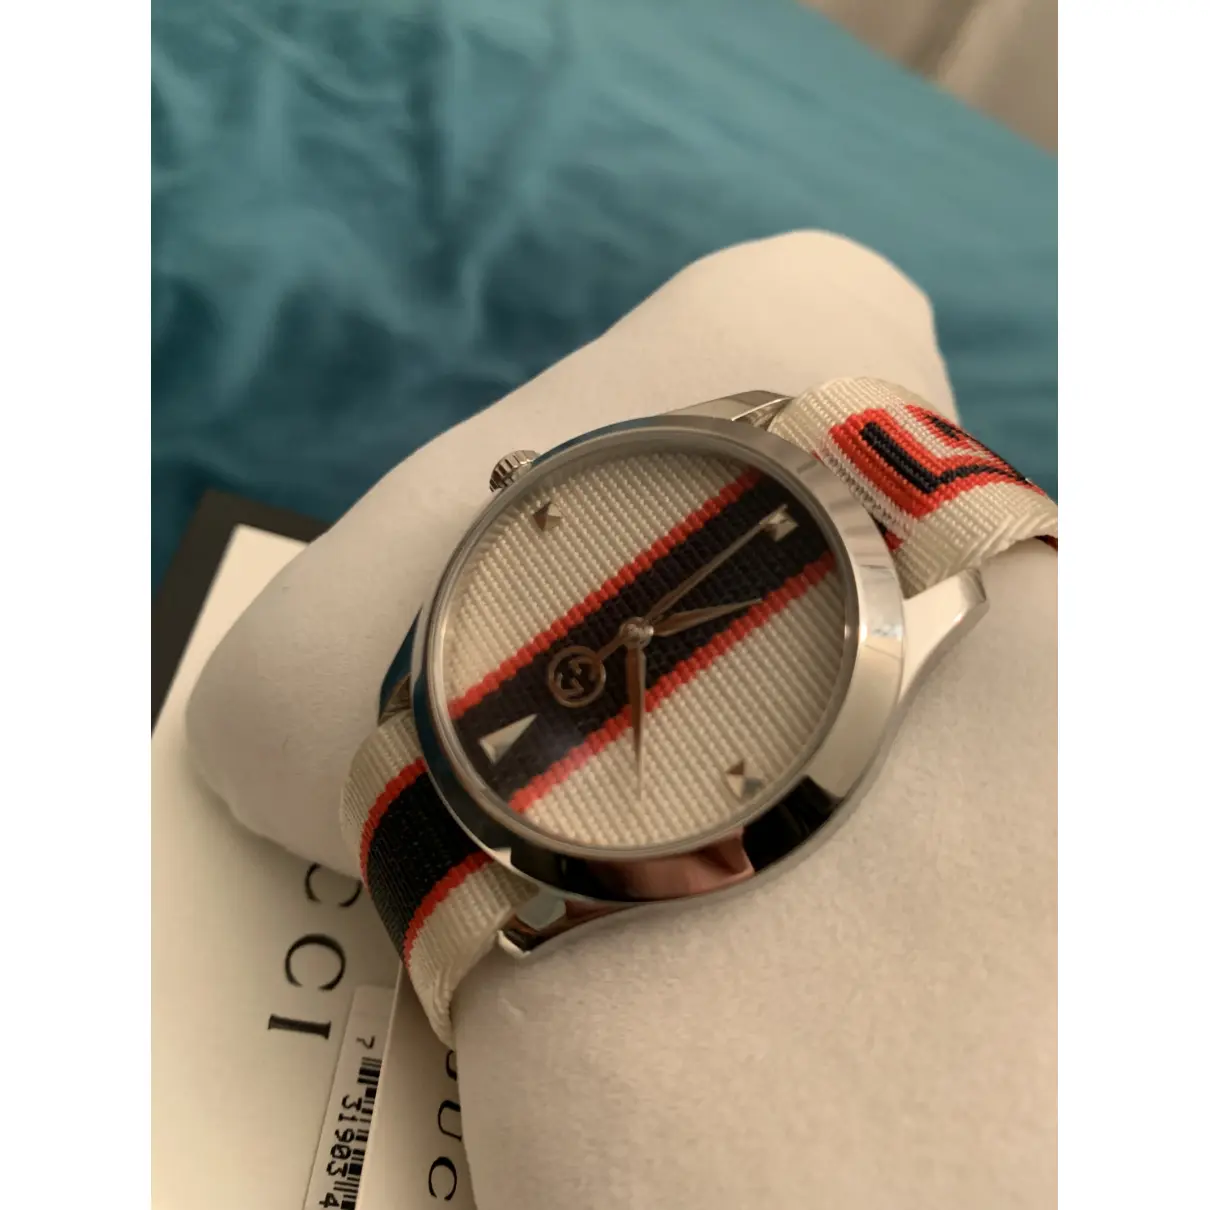 G-Timeless silver watch Gucci